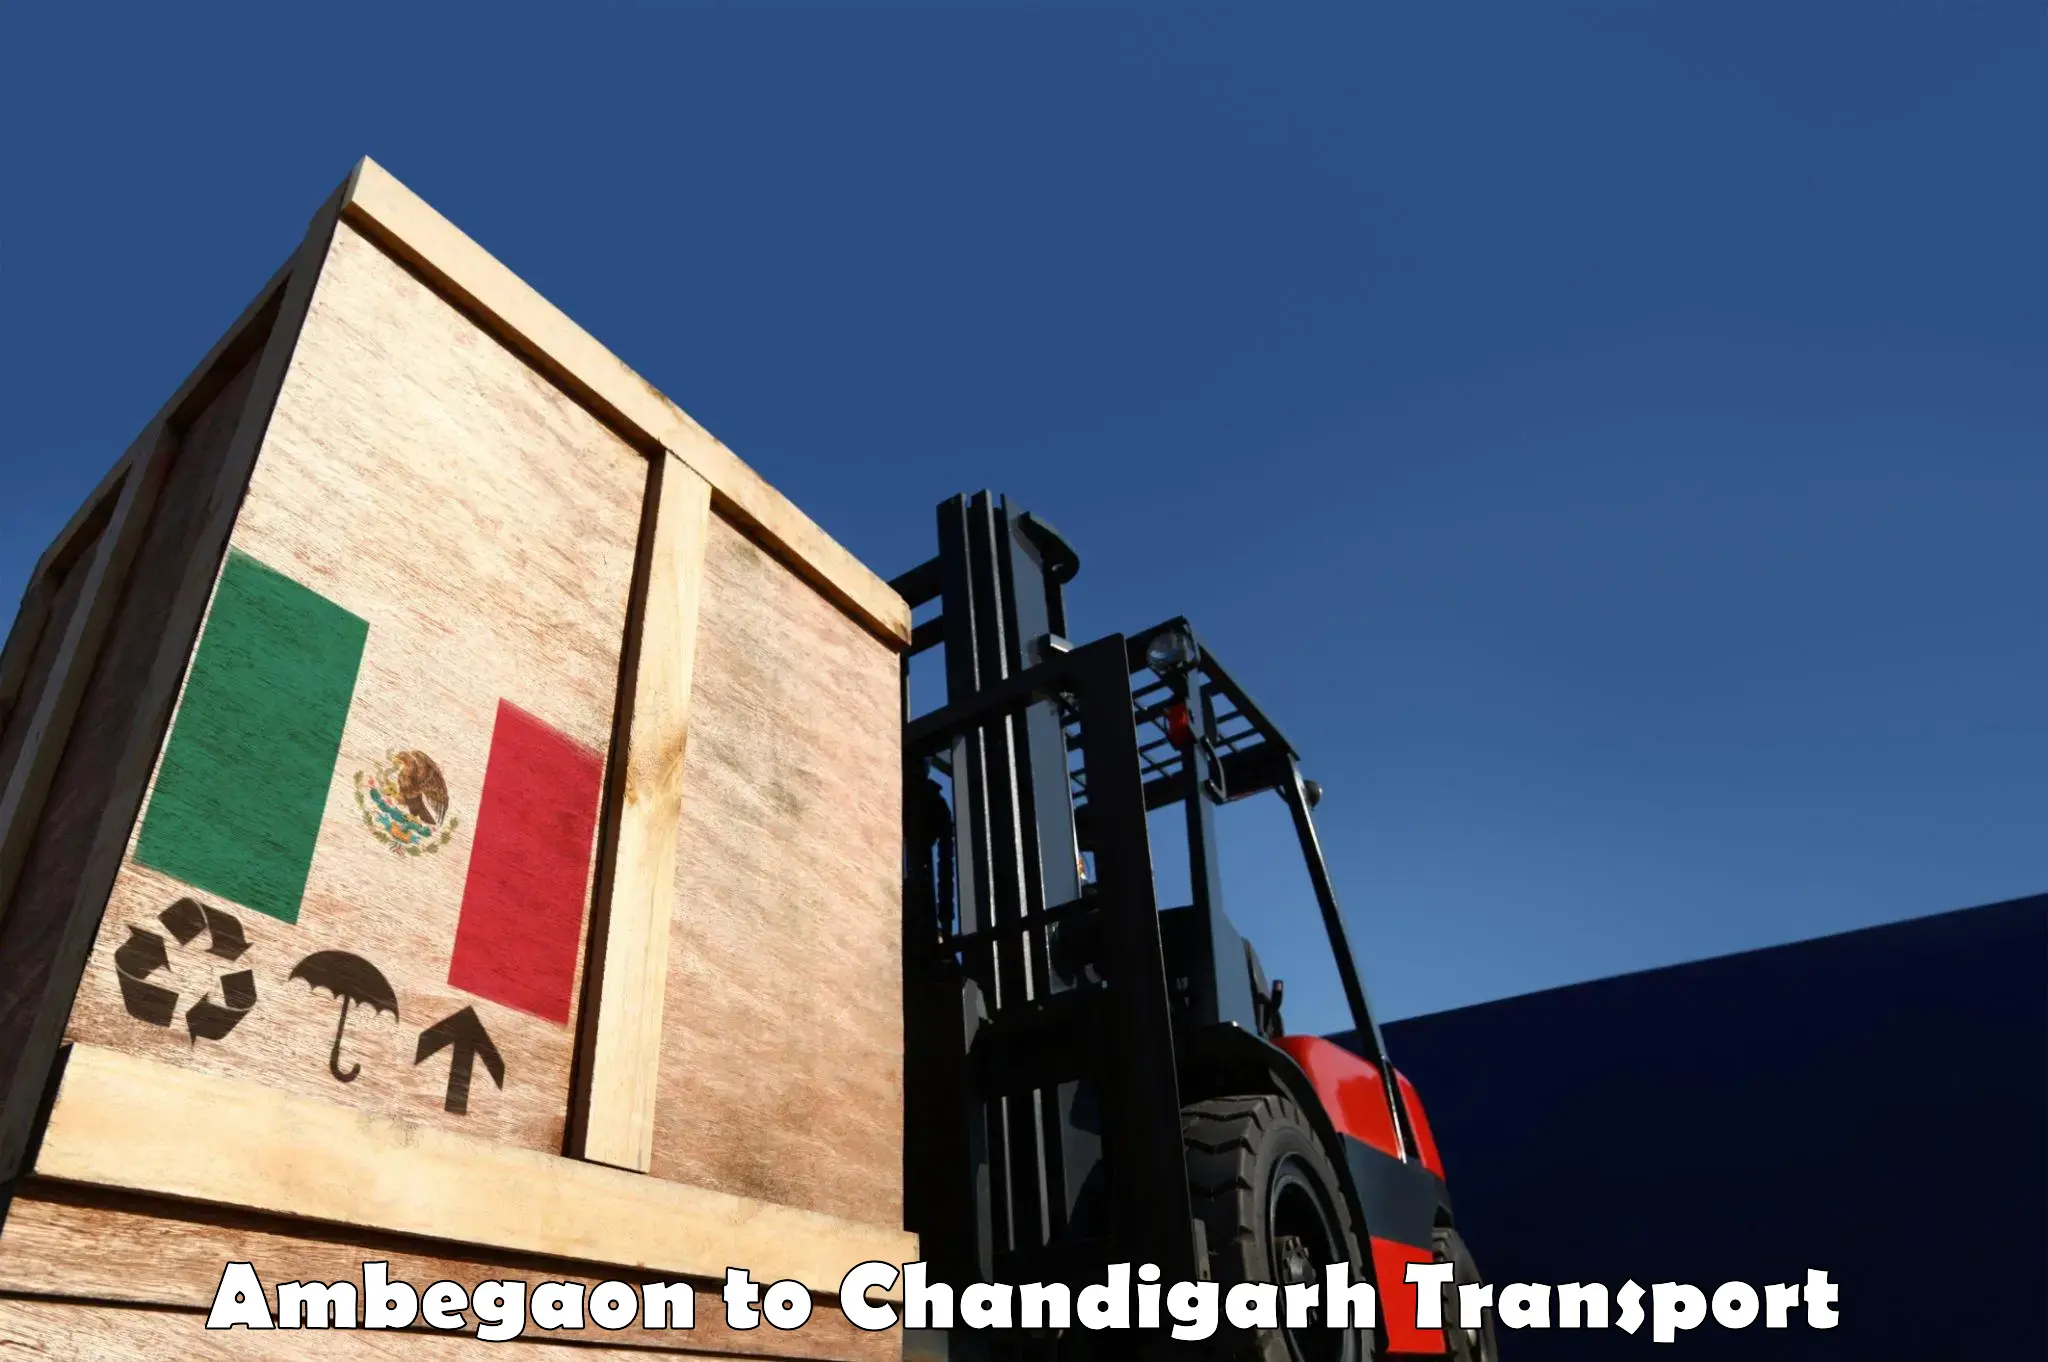 Commercial transport service Ambegaon to Chandigarh